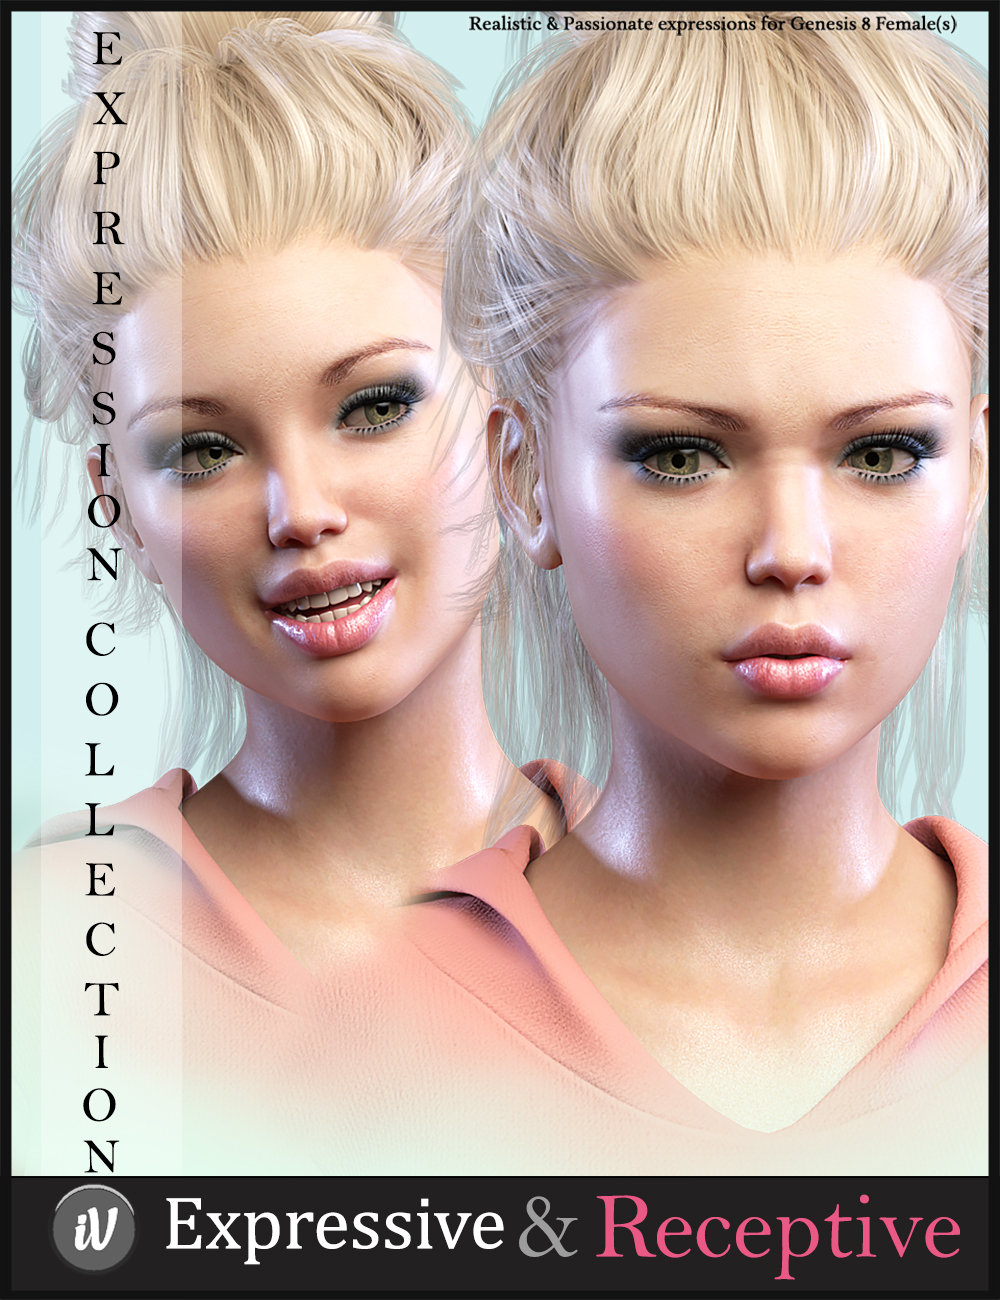 iV Expressive & Receptive Communication For Genesis 8 Female(s) by: i3D_LotusValery3D, 3D Models by Daz 3D